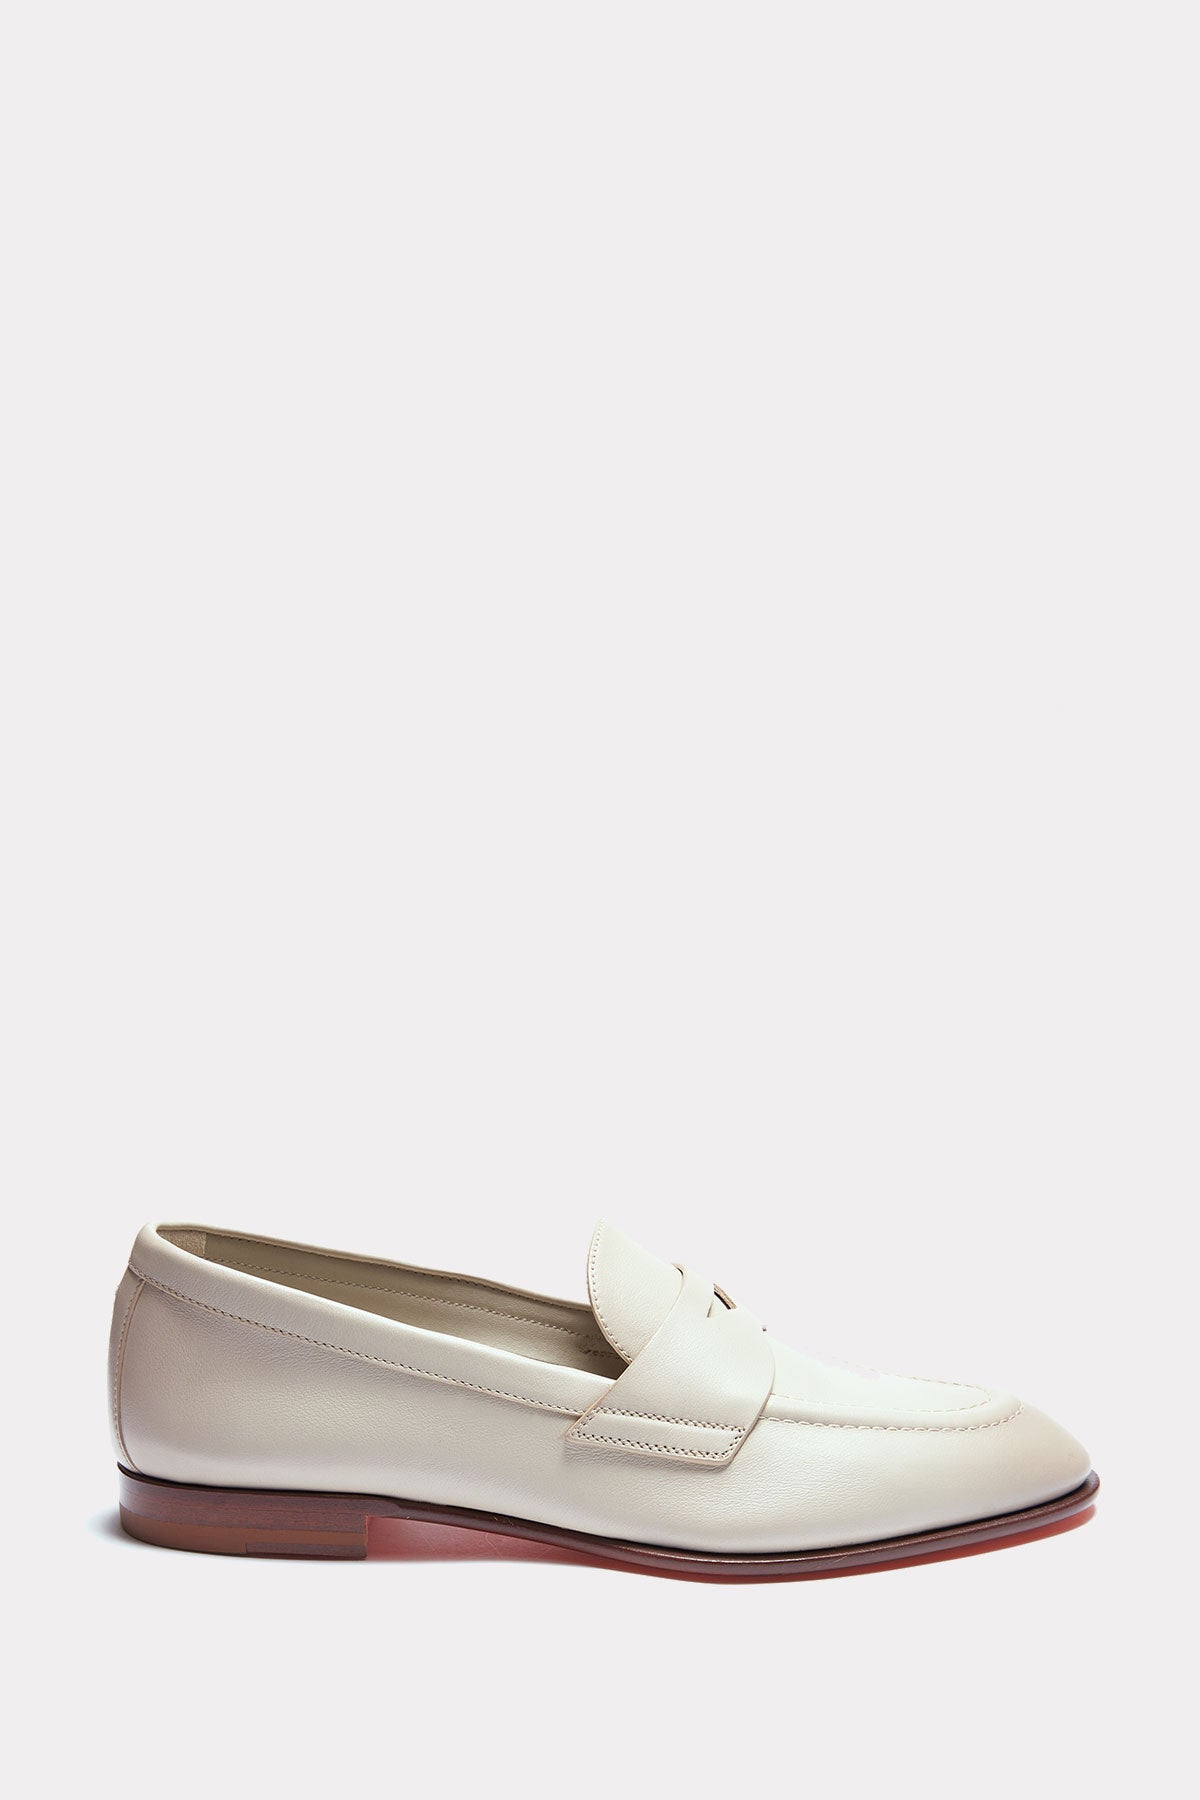 Loafer in creme